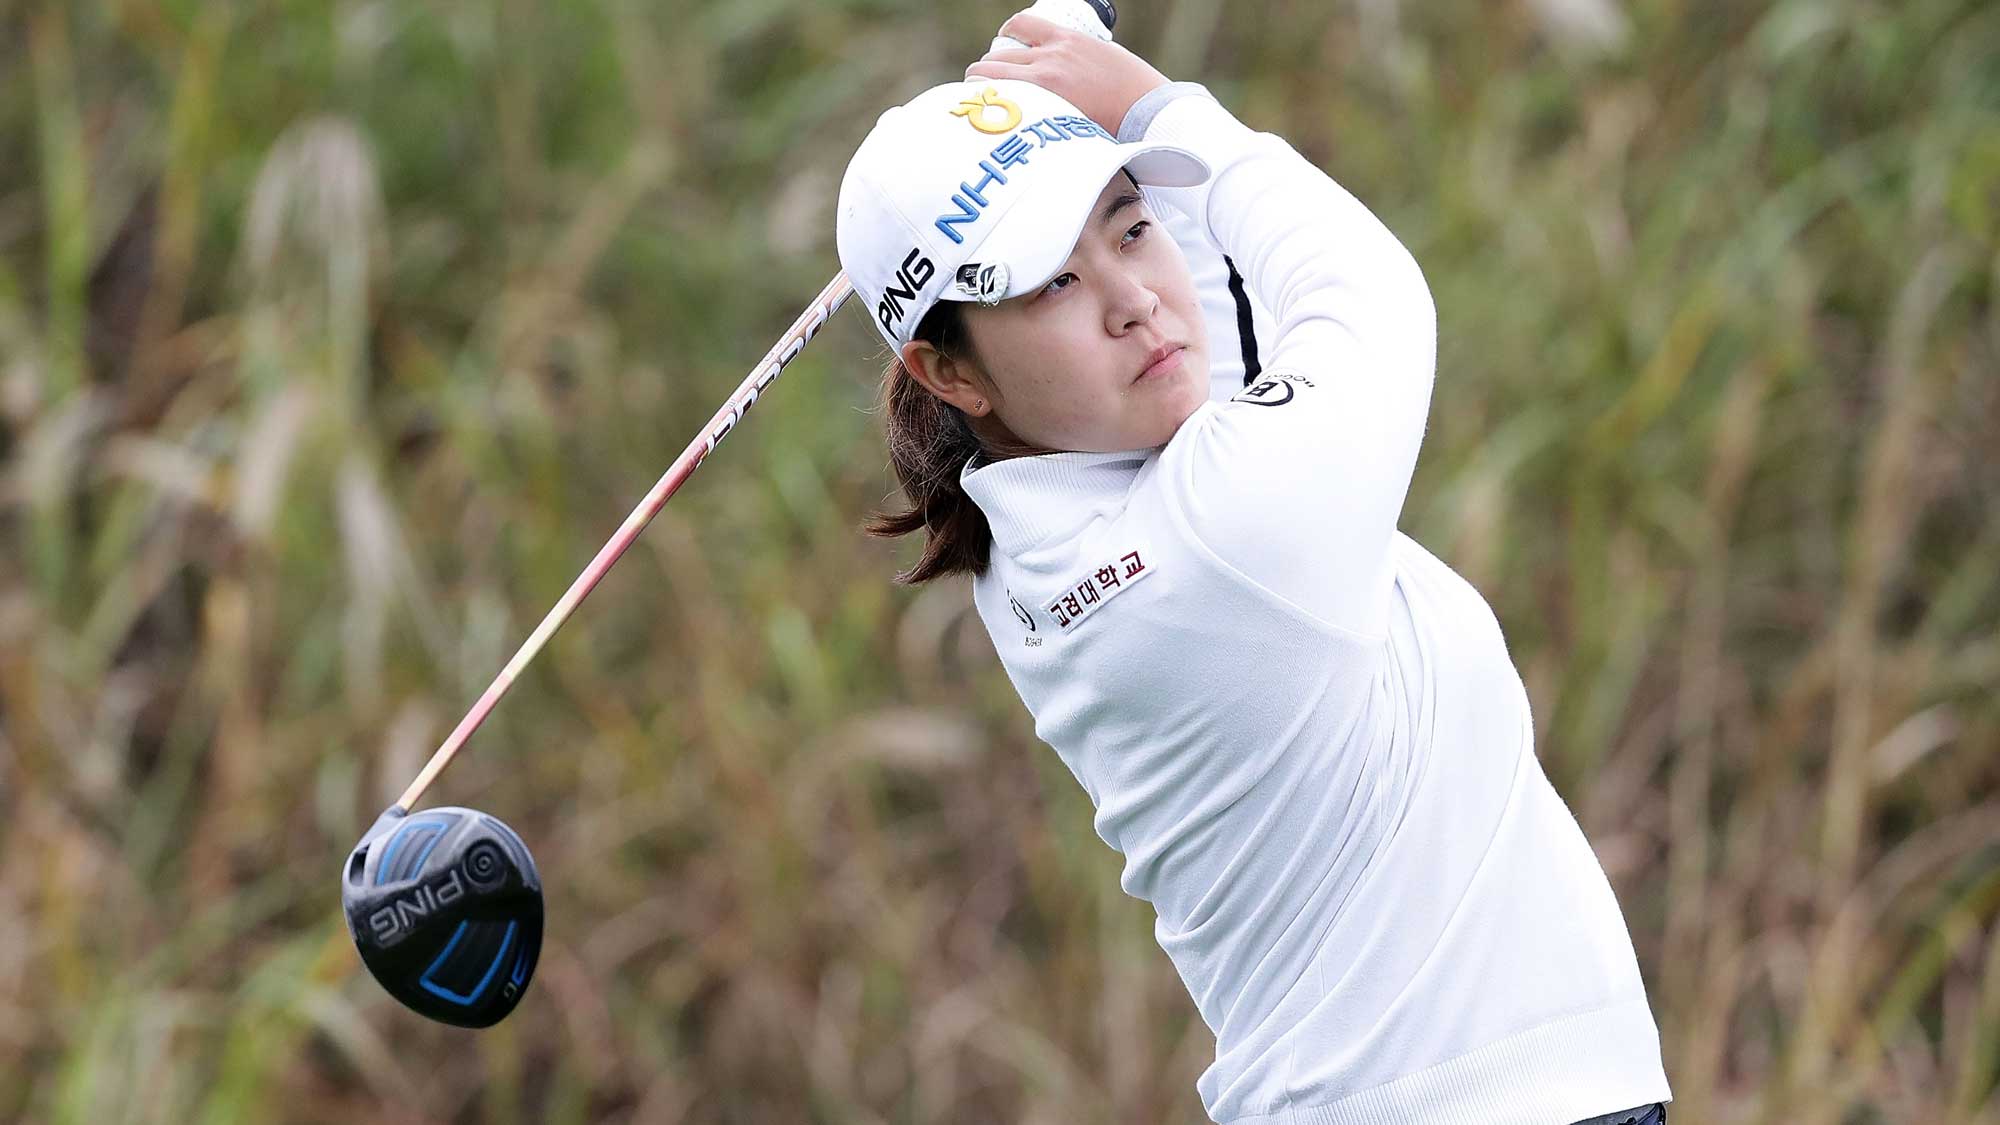 Min-Ji Park of South Korea plays a tee shot on the 9th hole during the first round of the LPGA KEB Hana Bank Championship